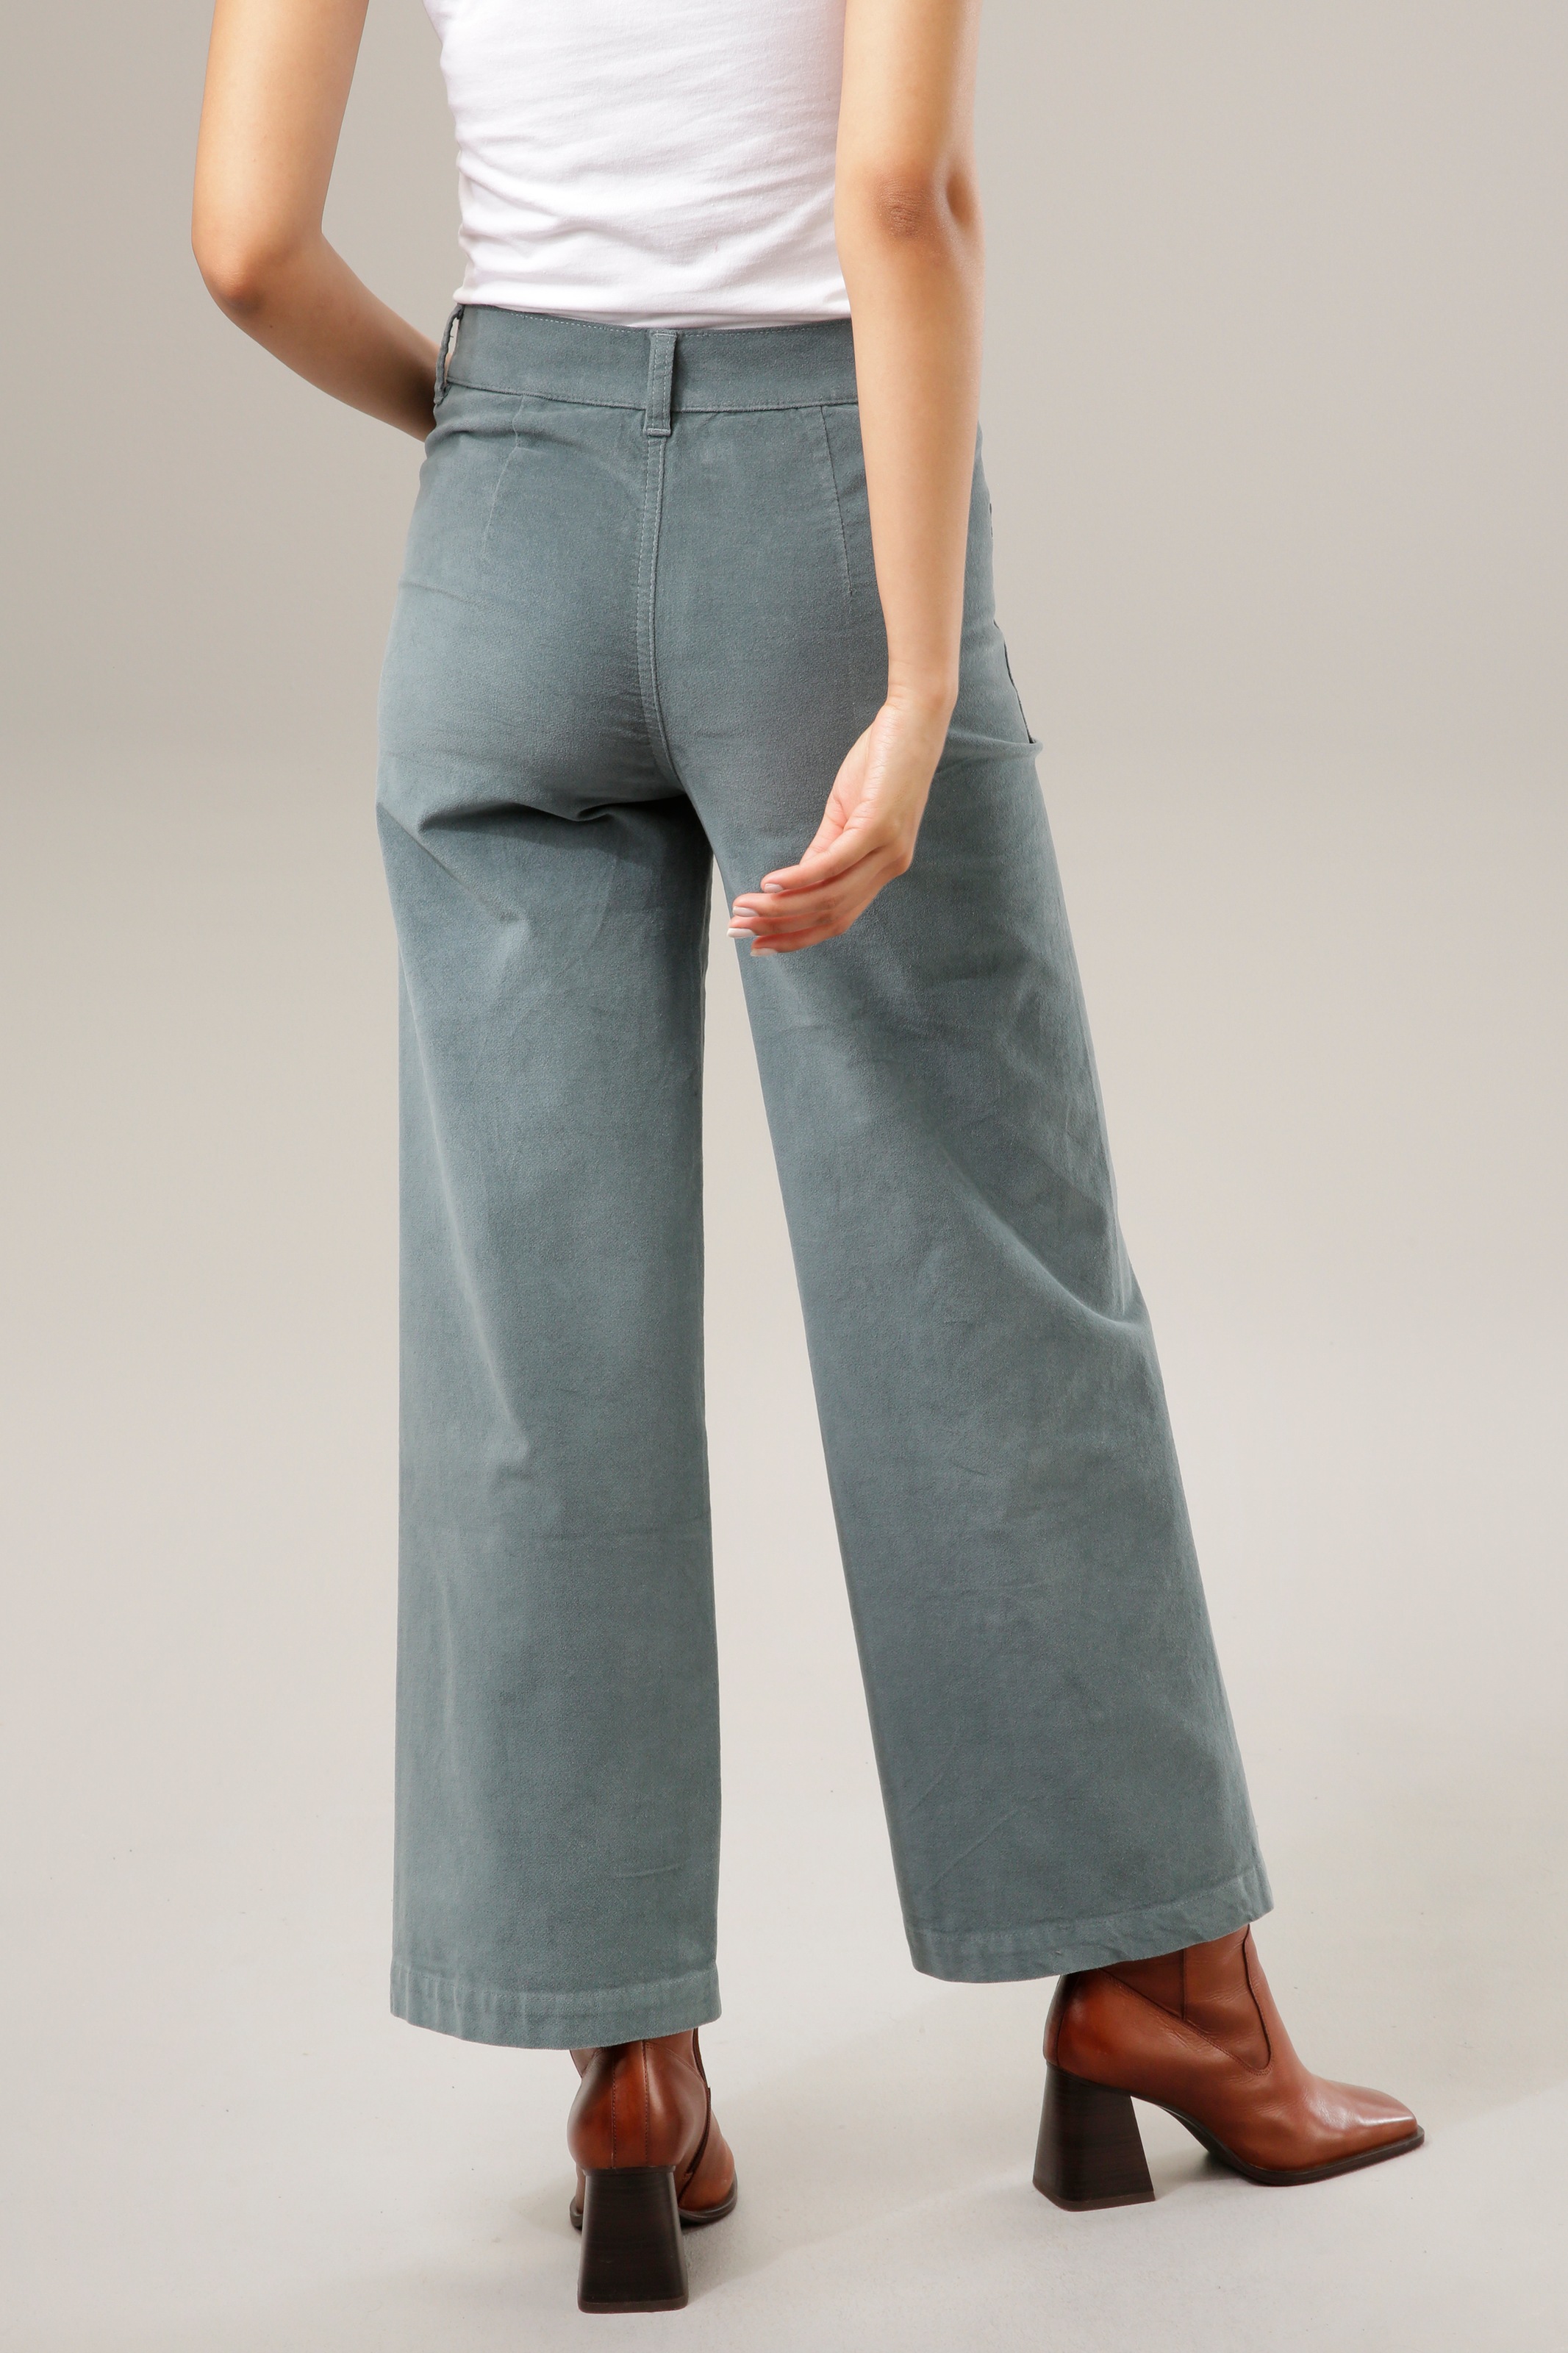 Aniston CASUAL Cordhose, in angesagter Hight-waist-Form